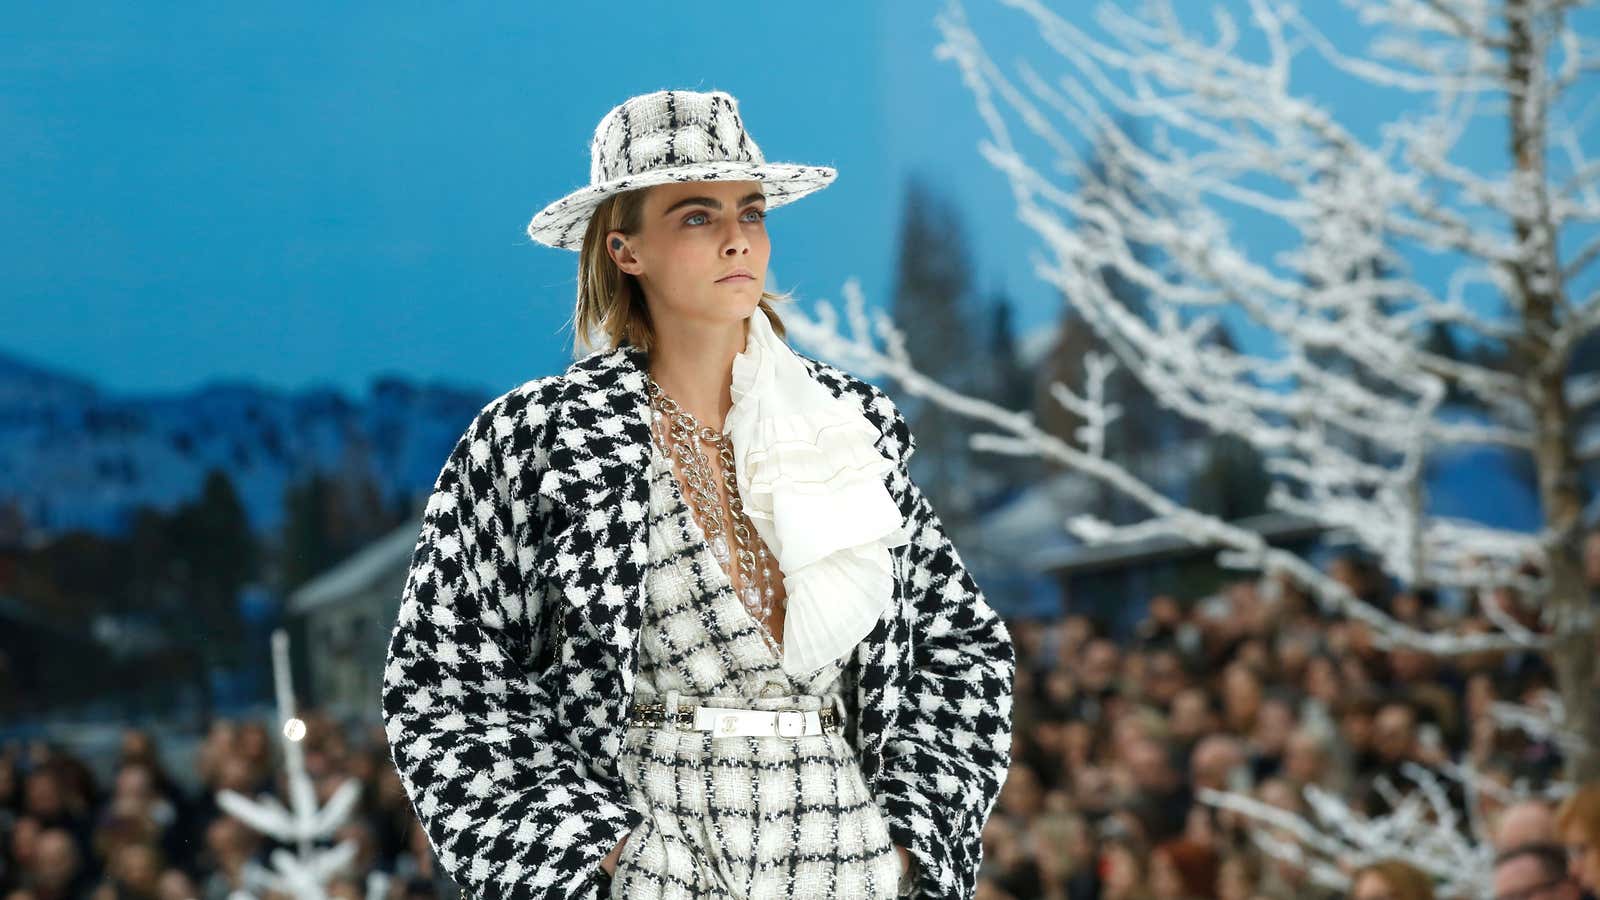 Model Cara Delevingne on a snowy hike for Chanel fall-winter 2019.